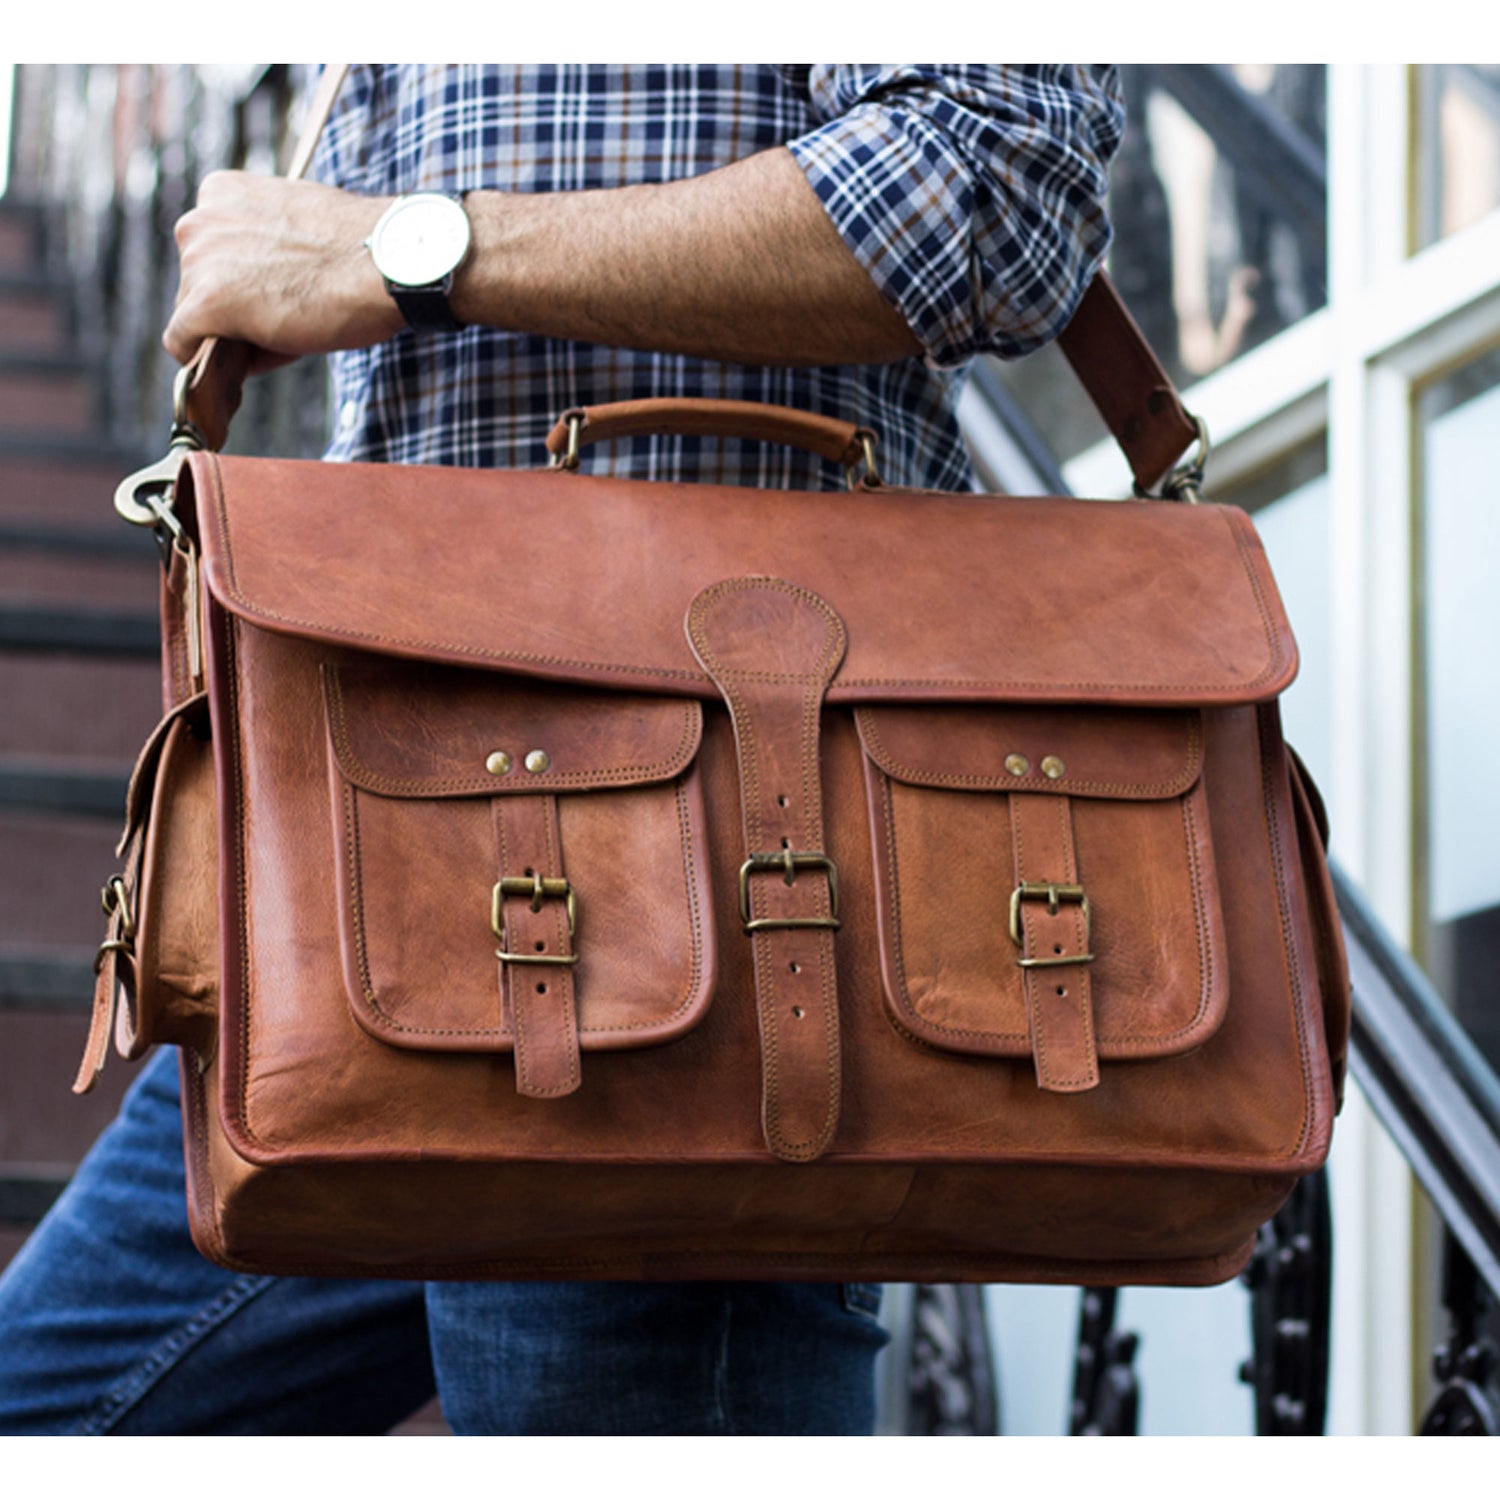 Leather Messenger Bags  ClassyLeatherBags — Classy Leather Bags